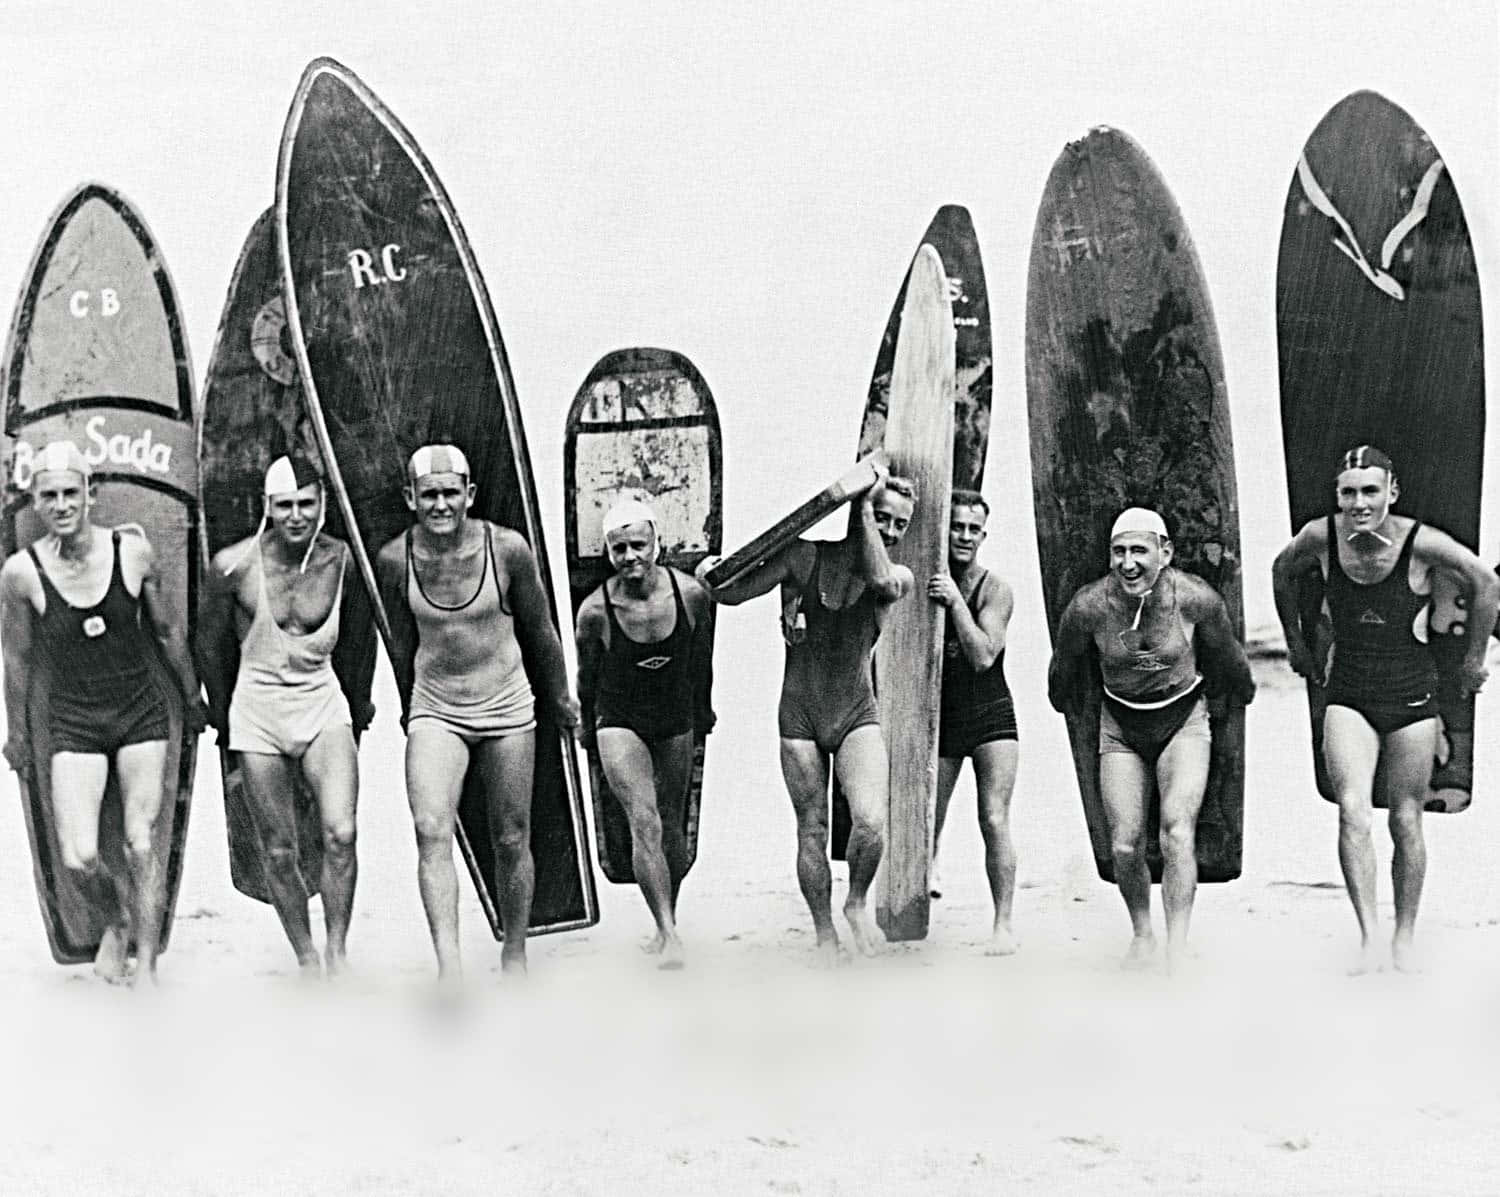 "The vintage surf lifestyle is one of joy, peace, and tranquility." Wallpaper